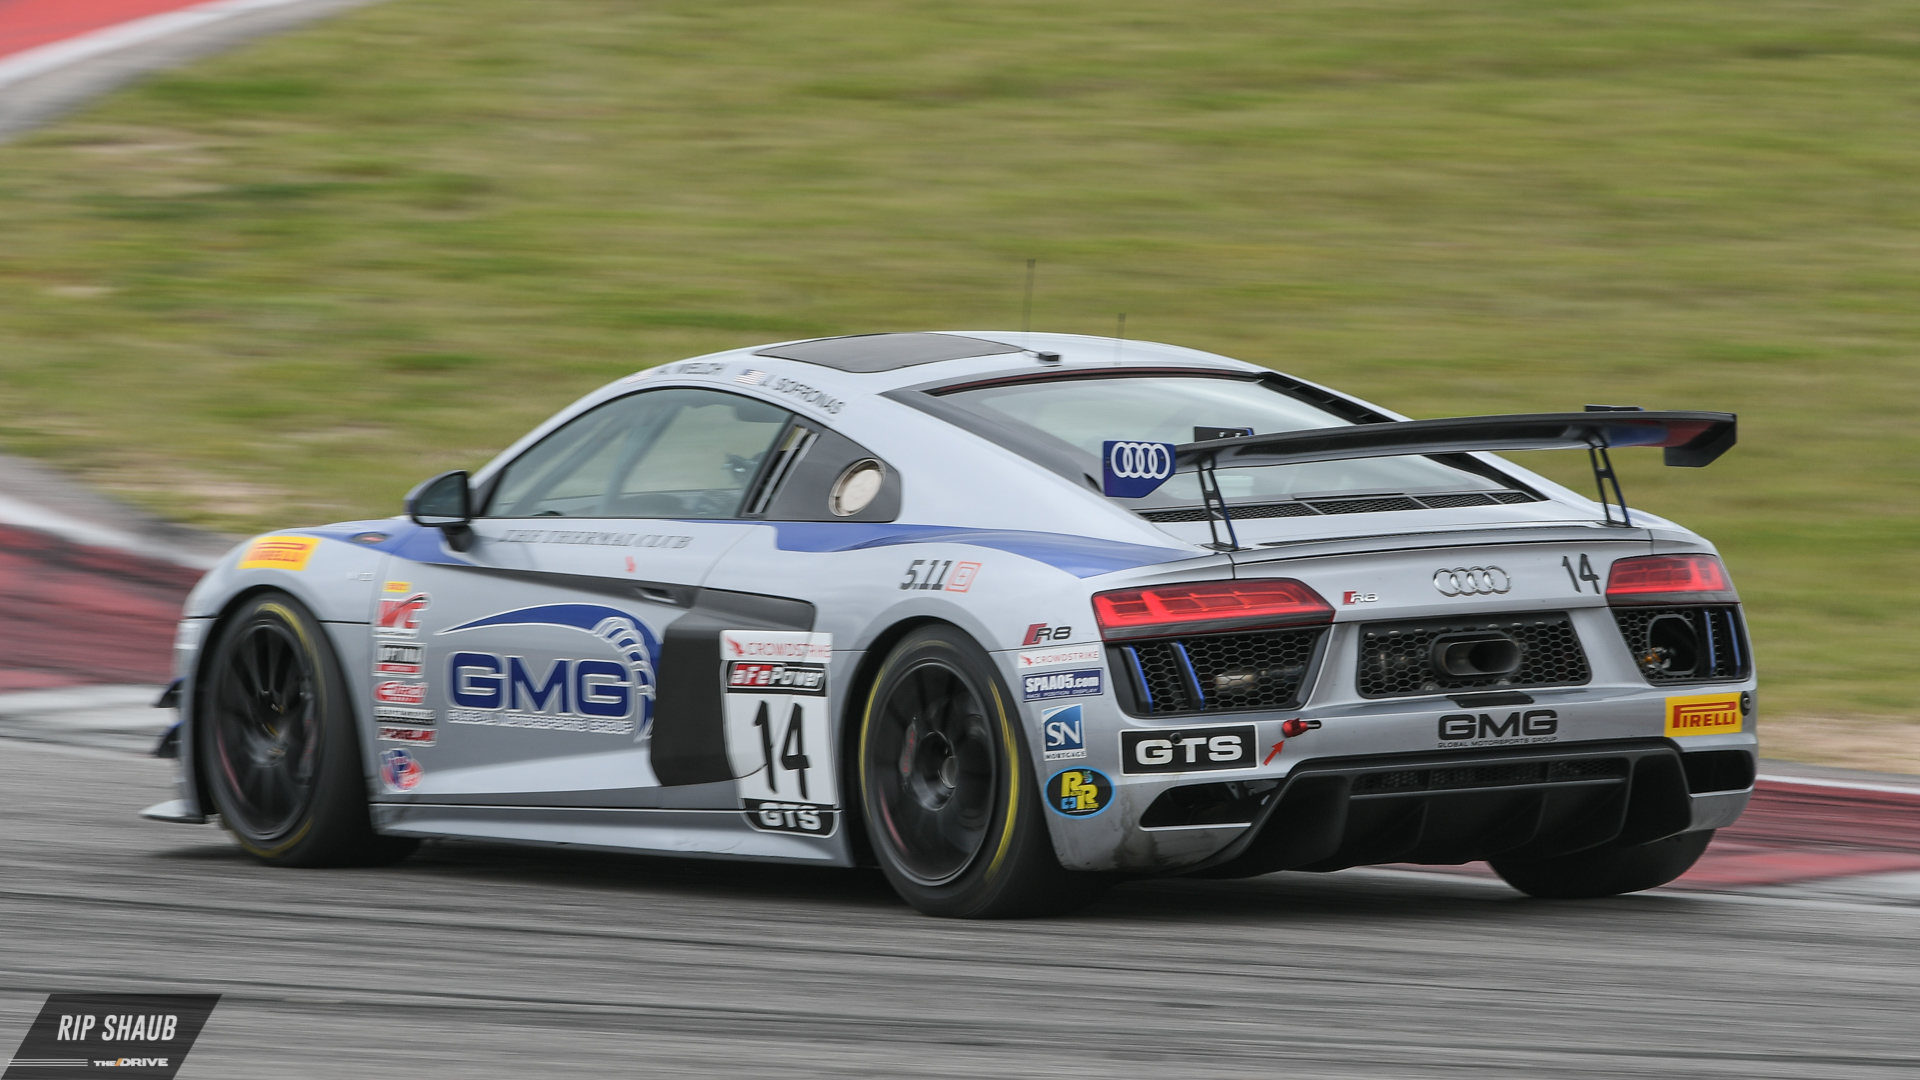 Alex Welch and James Sofronas again in their Audi R8 LMS GT4., <i>© Rip Shaub - All Rights Reserved</i>